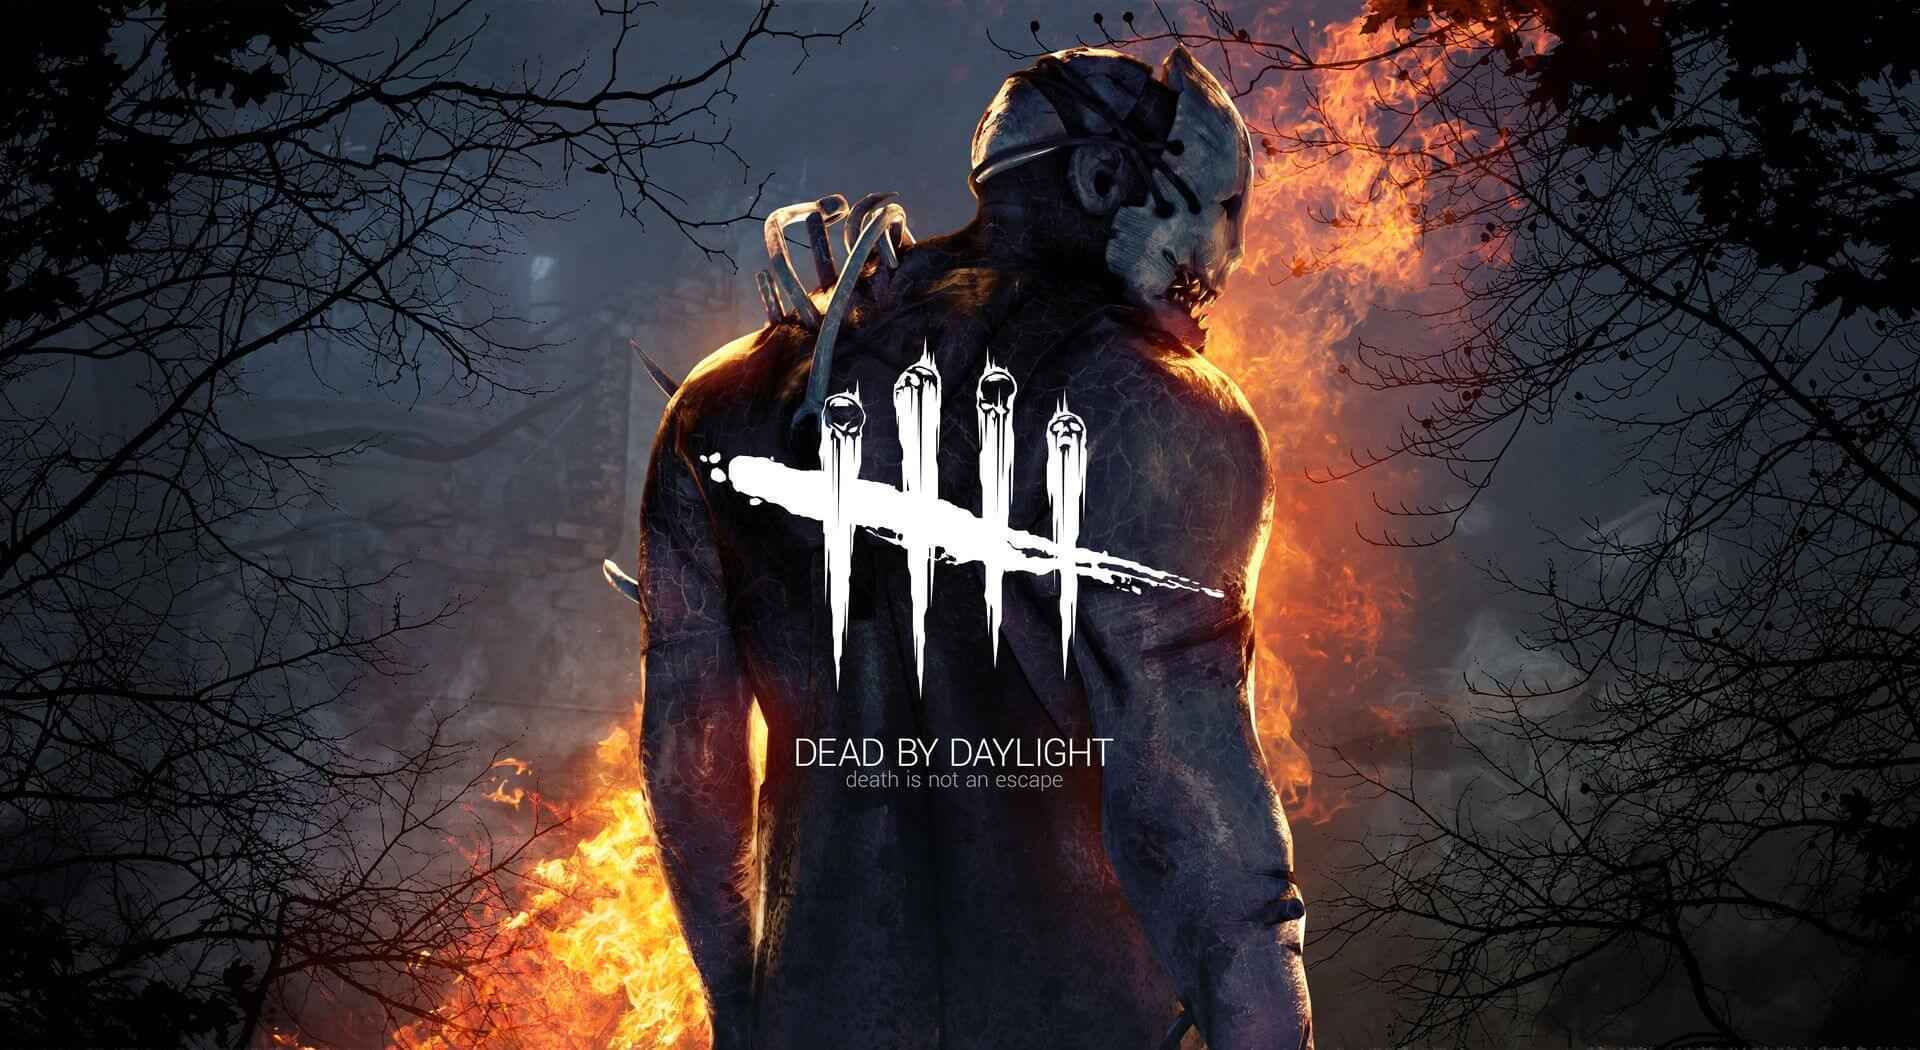 Dead By Daylight Down: Server Connection Issues Reported by Users